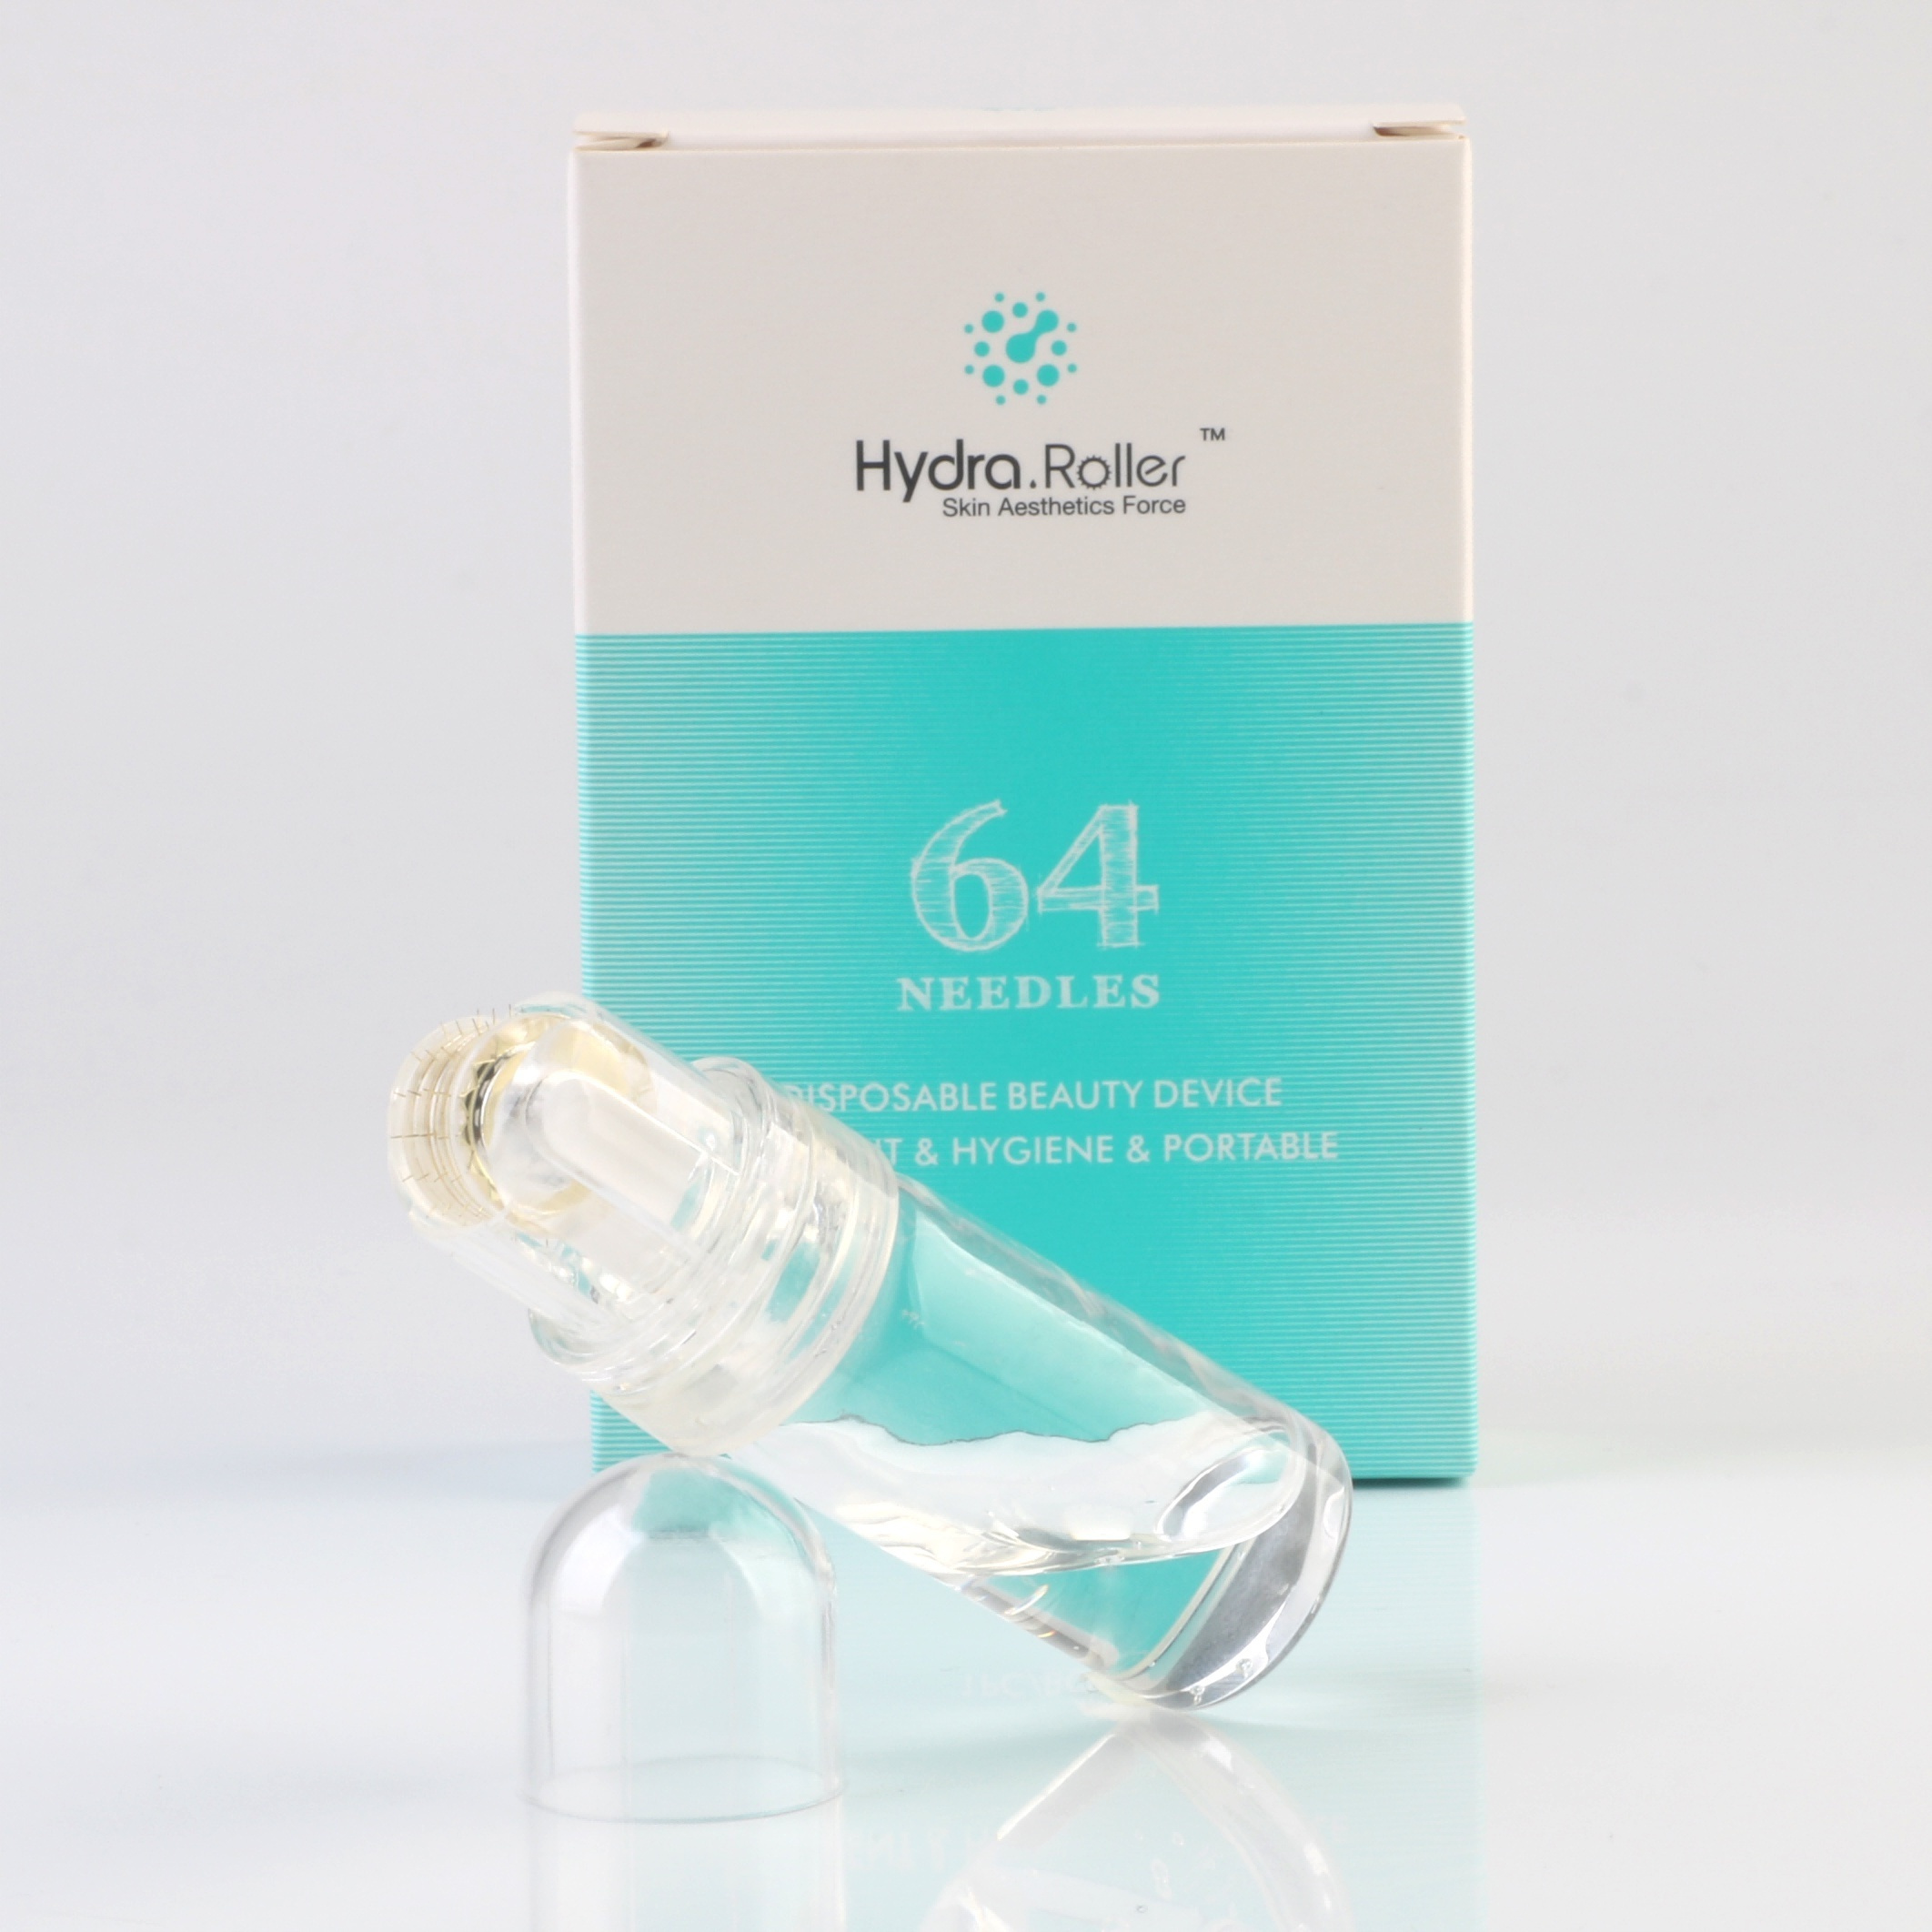 

Titanium 64 Needles Hydra Micro Needle Roller Home Use 0.25mm Hydra Rollerdermaroller With 10ml Bottle For Hyaluronic Acid Micro Needle Derma Meso Roller - Facial Care Gifts For Mother